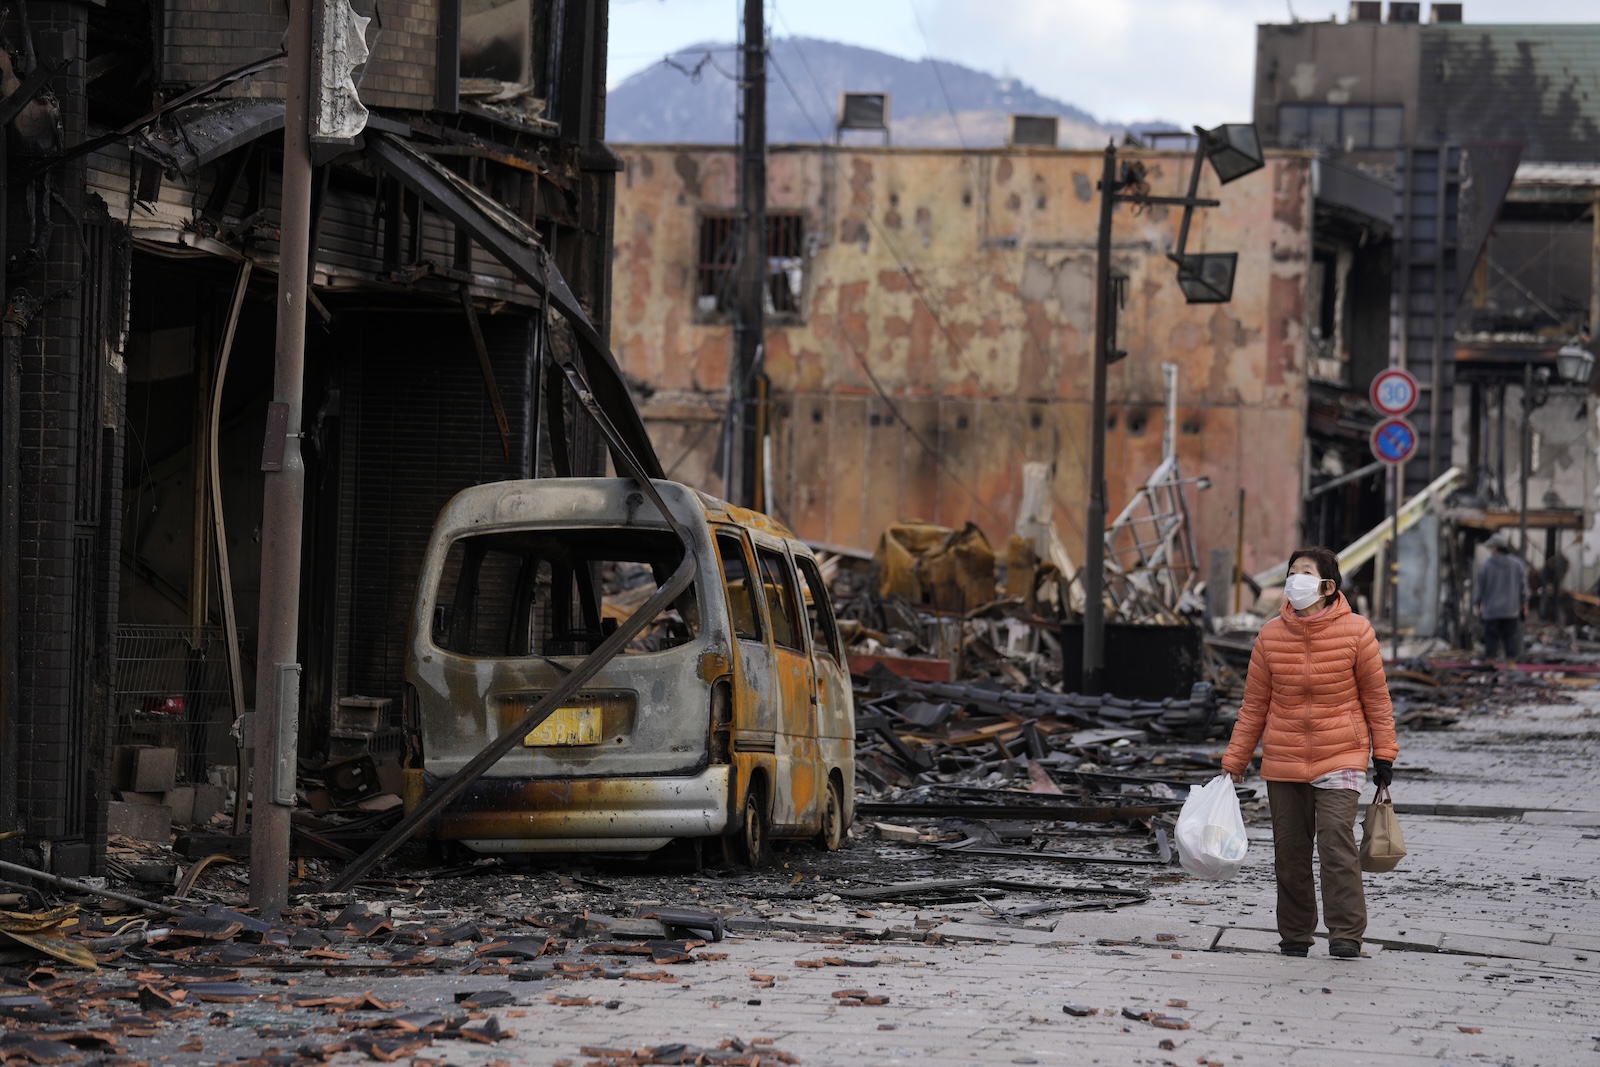 epa11056363 A woman looks at the burnt remains of a vehicle and building structures following an earthquake in Wajima, Ishikawa Prefecture, Japan, 04 January 2024. The Ishikawa Prefecture Government announced that 78 people were killed and 25 missing following a magnitude 7 earthquake (the USGS listed the earthquake as 7.5 magnitude) which occurred on 01 January. About 33,000 residents in Ishikawa Prefecture have evacuated to 355 makeshift evacuation centers. According to Hokuriku Electric Power Company, about 33,900 homes lost electricity in the prefecture.  EPA/FRANCK ROBICHON